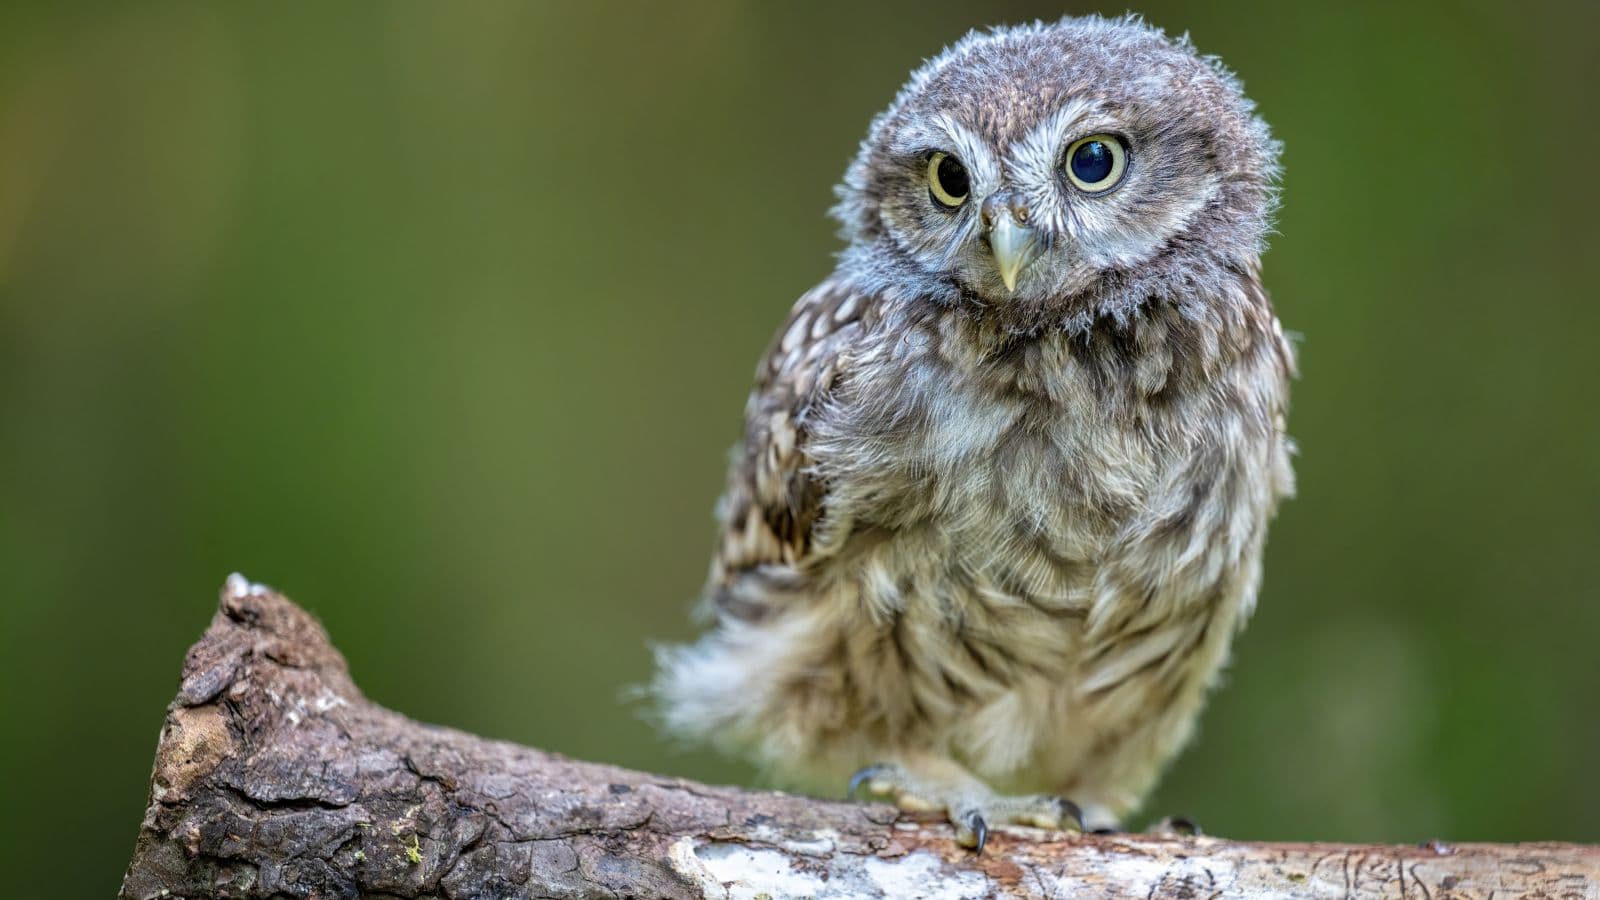 <p><a href="https://www.teriin.org/article/critically-endangered-forest-owlet-under-threat-habitat-loss"><span>The Energy and Resources Institute</span></a><span> reports that the forest owlet is only found in small areas of forest in India and was once believed to be extinct until its rediscovery in the late 1990s. This animal intensely relies on the Indian forests for its survival, meaning that any modifications to the habitat, including those due to climate change, could have severe biodiversity effects. </span></p>